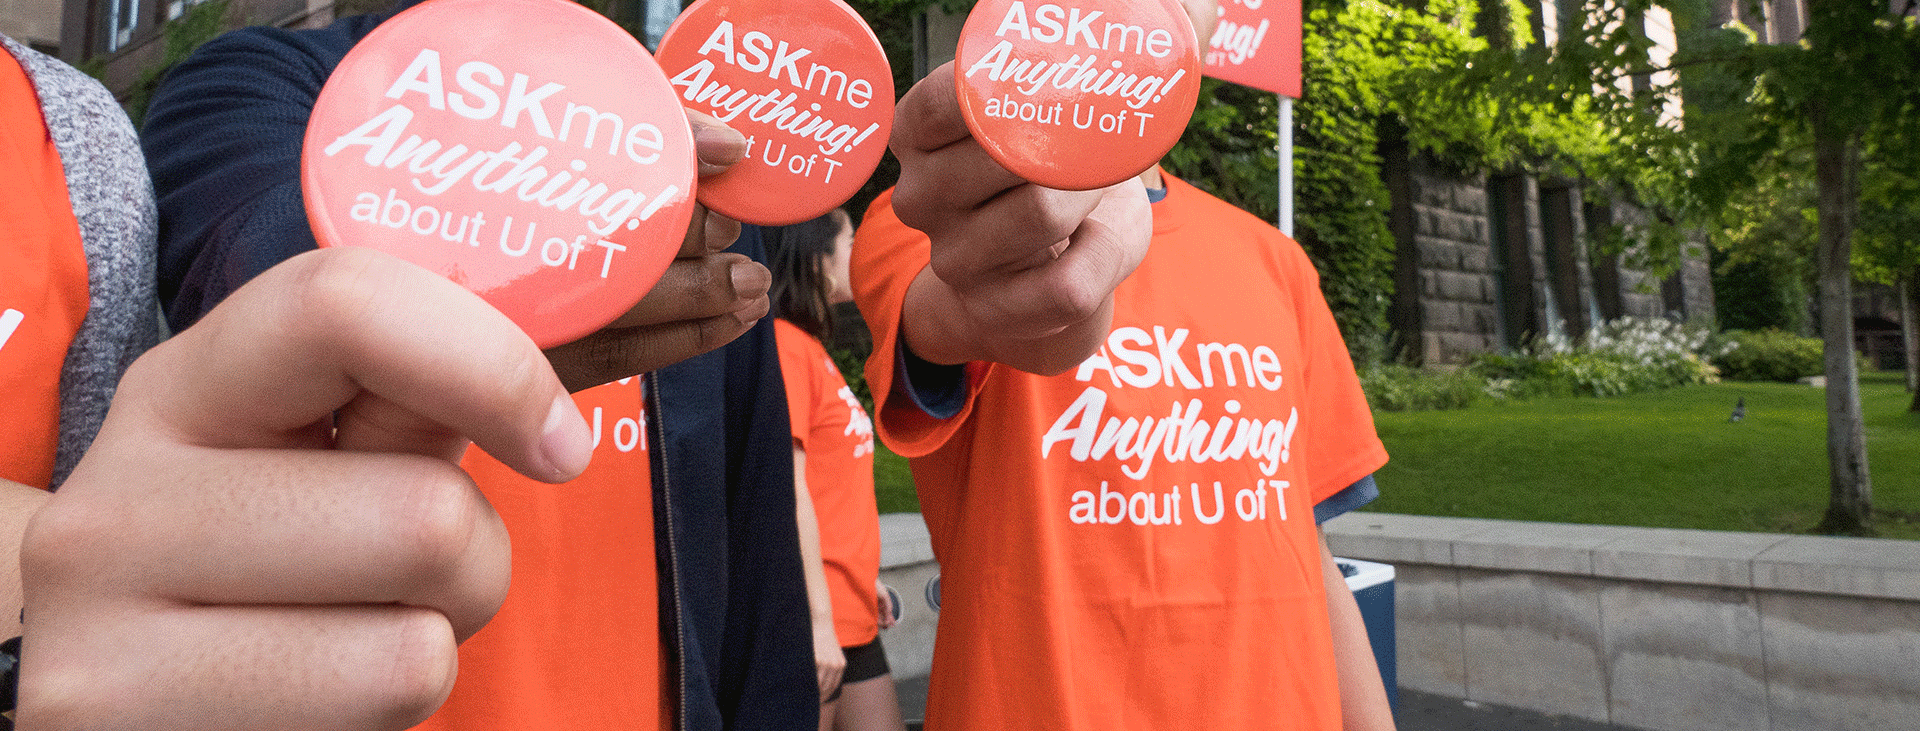 Students wearing orange askme t-shirts holding askme buttons